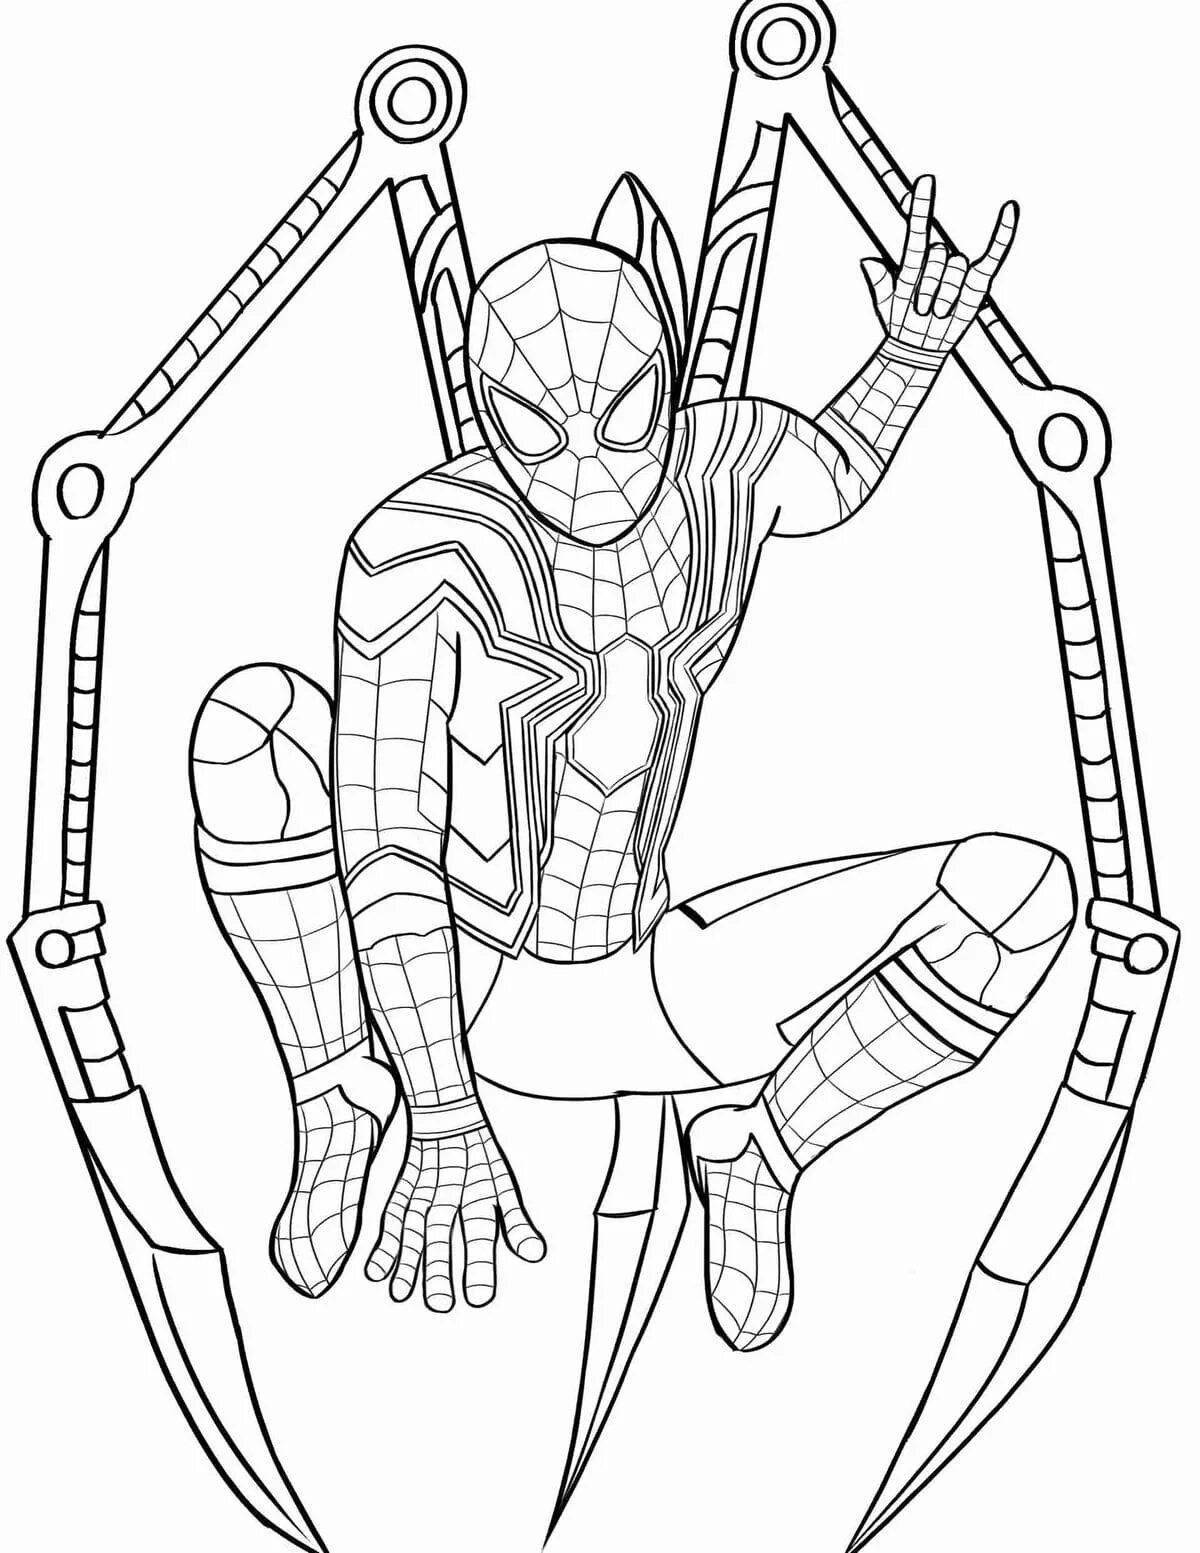 Marvel Spider-Man Vibrant Coloring Page